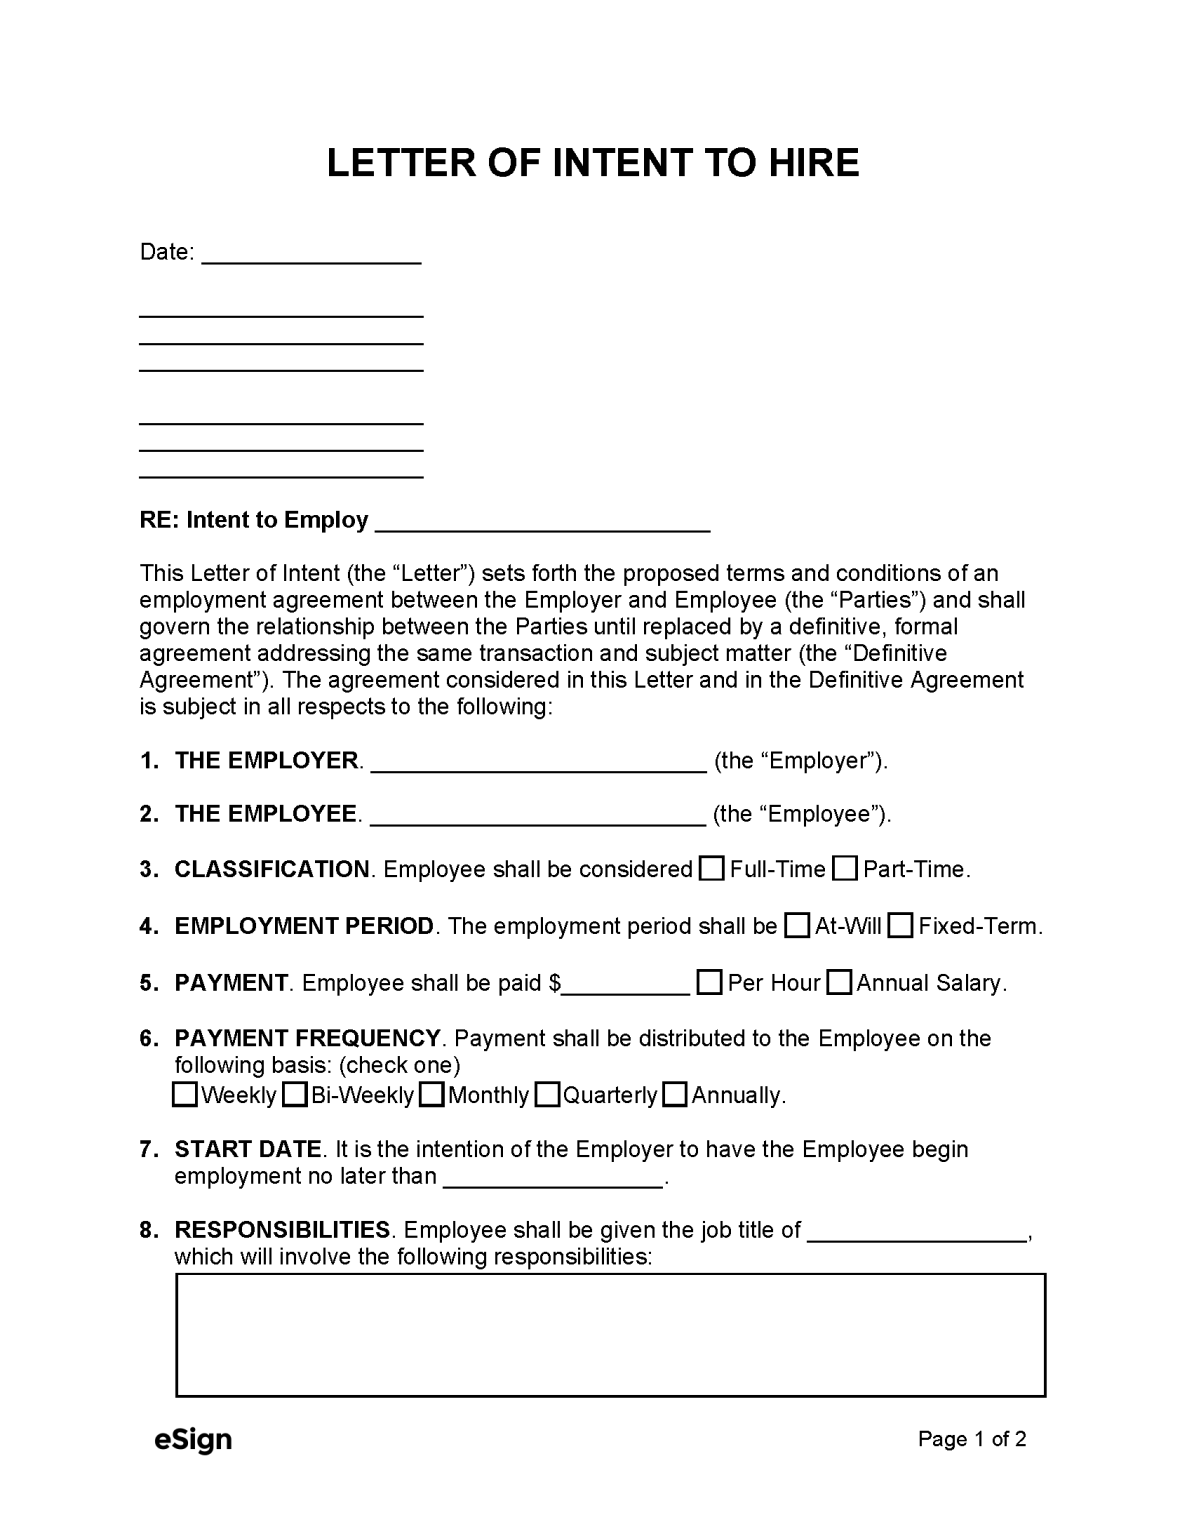 Free Letter of Intent to Hire | PDF | Word